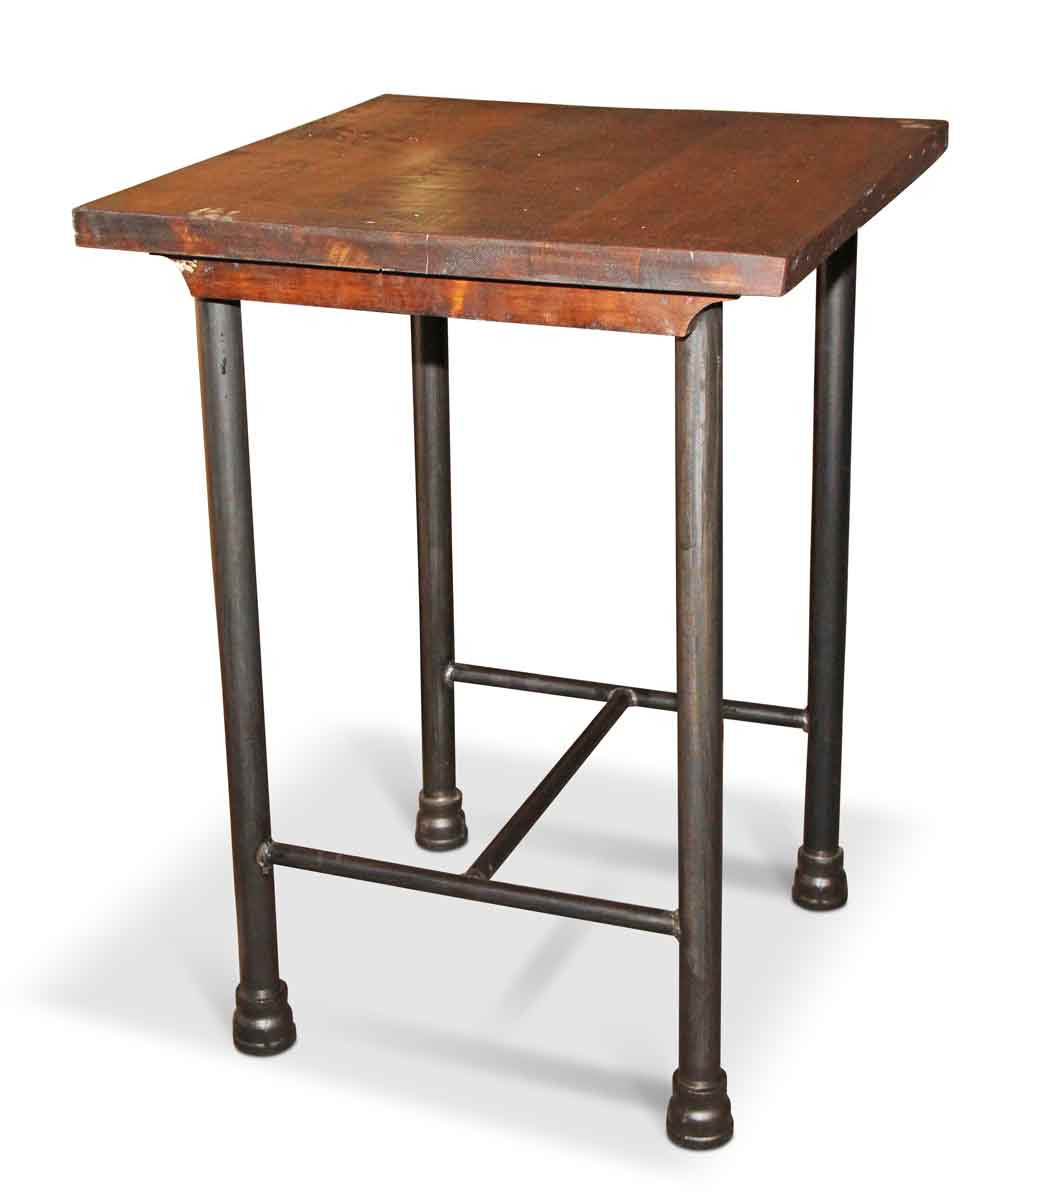 Small Tall Kitchen Tables
 Square Kitchen Island or Tall Side Table